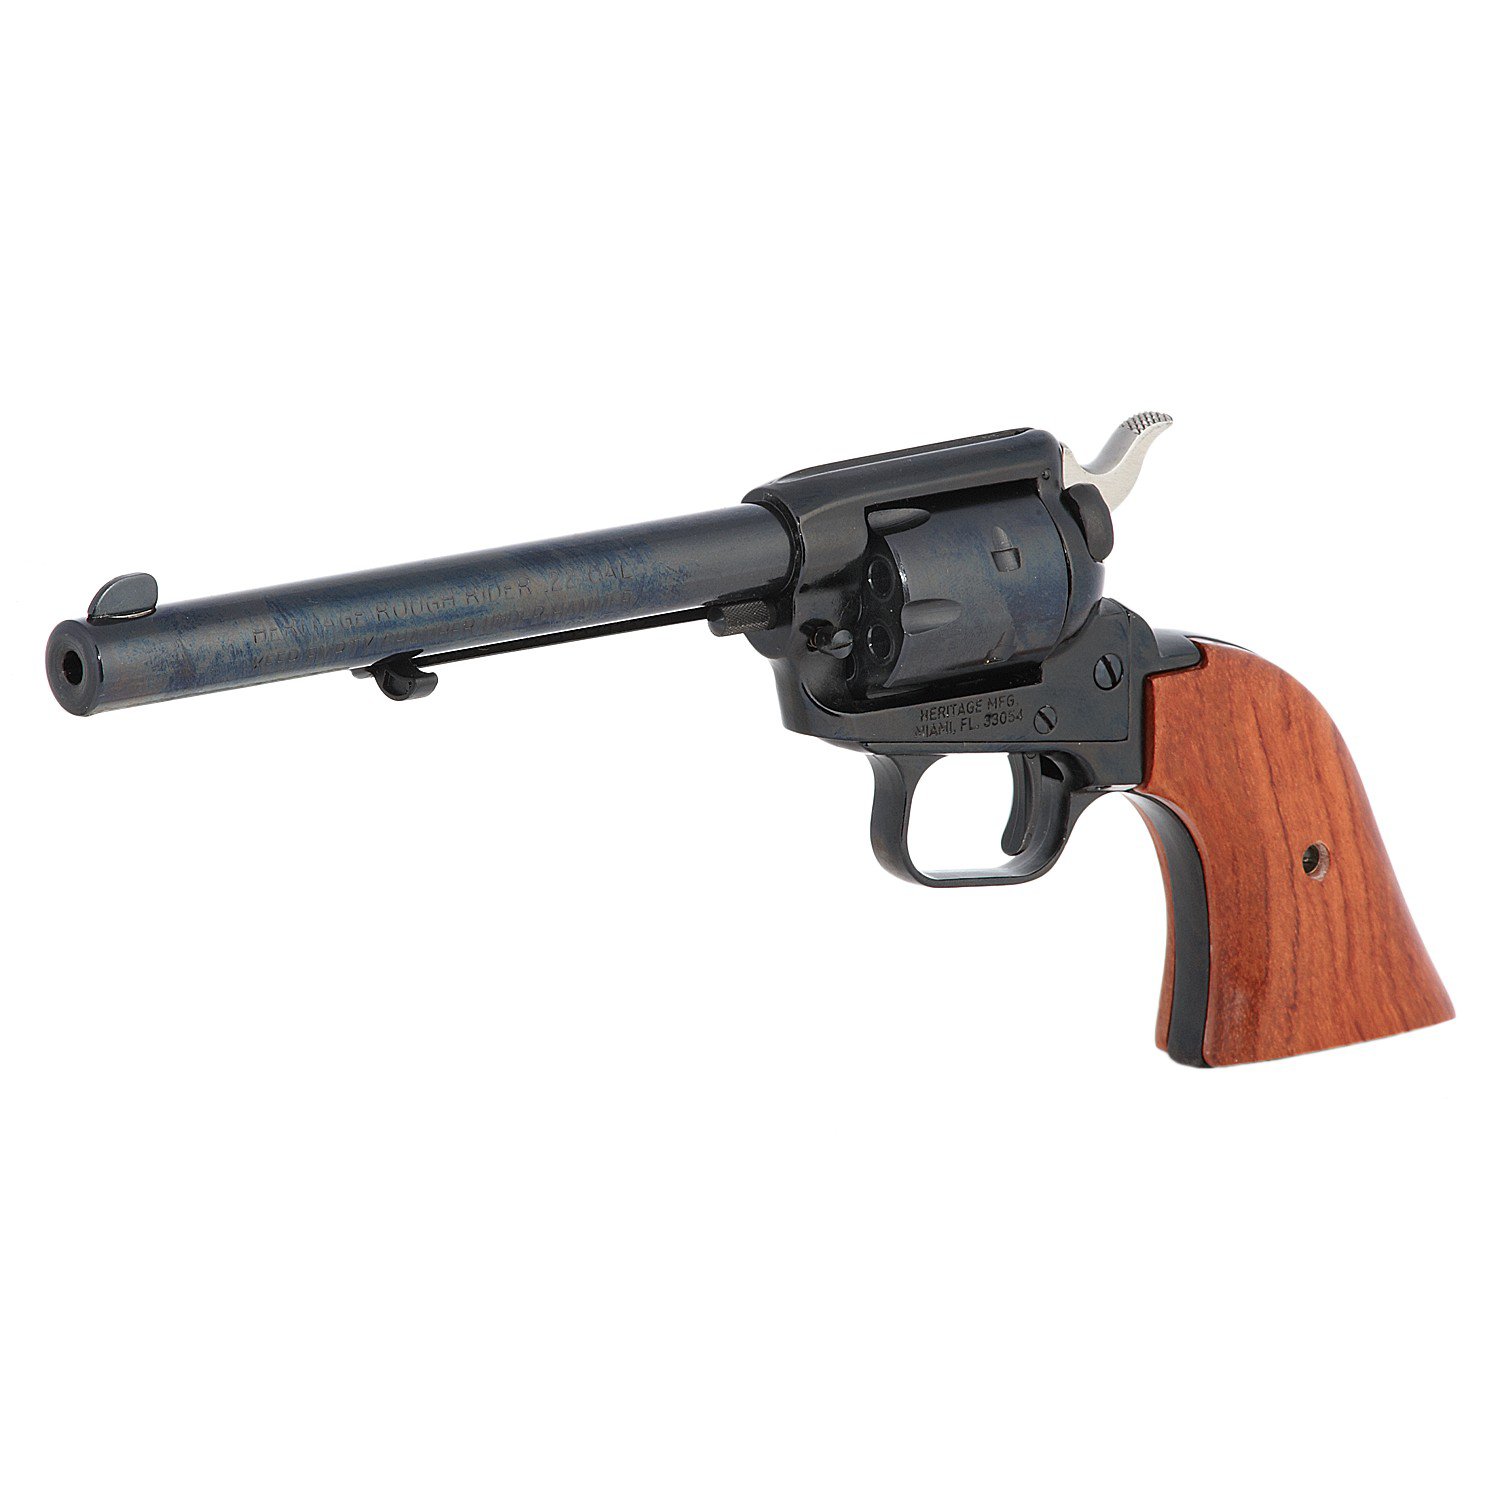 The Heritage Rough Rider .22 Caliber Revolver features a tight cylinder loc...